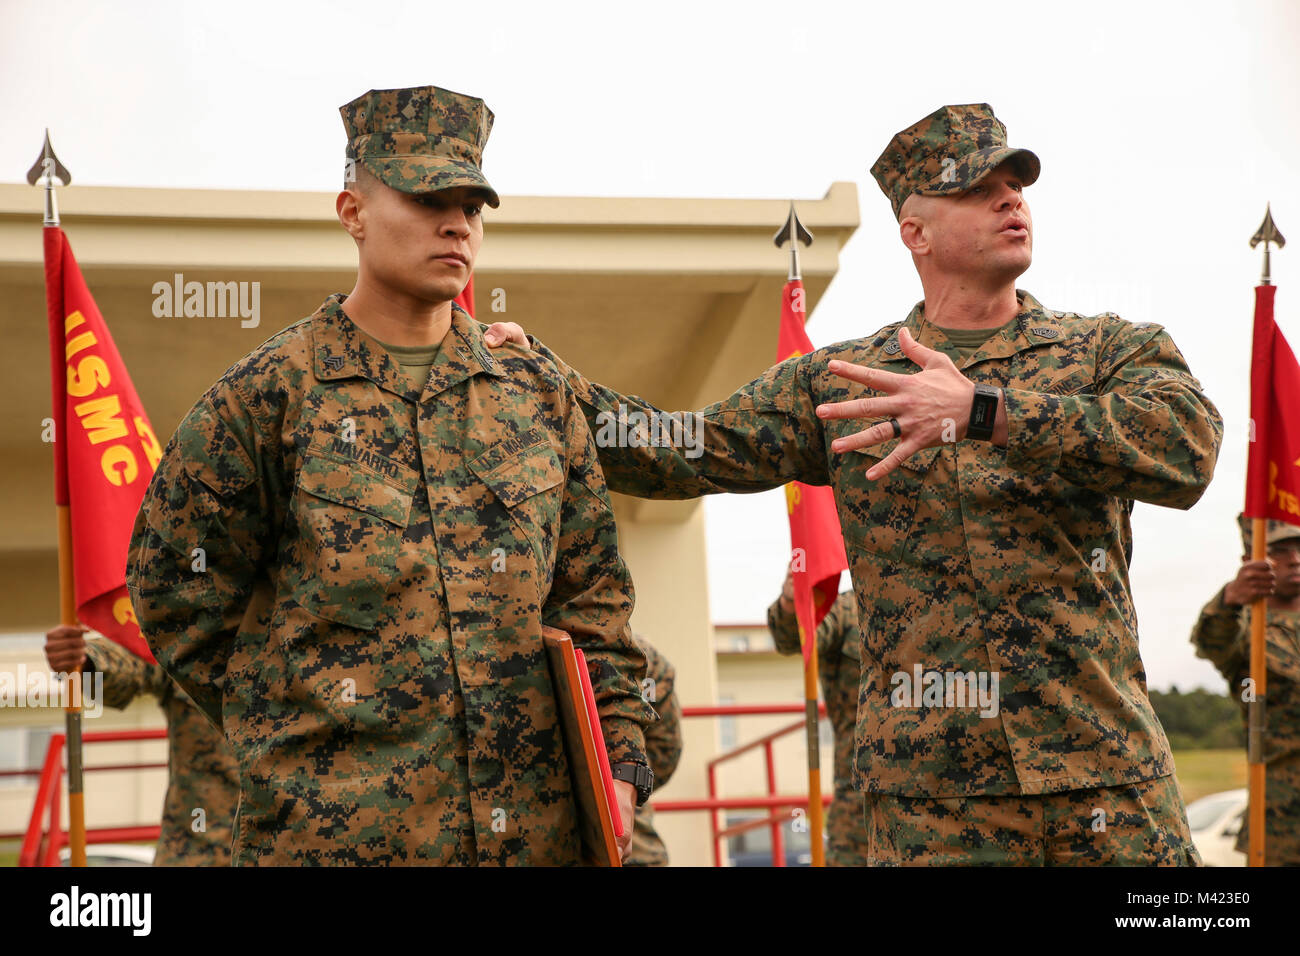 Sgt. Maj. Jeffery Vandentop, right, battalion sergeant major of 3rd Transportation Support Battalion, 3rd Marine Logistics Group, speaks about Sgt. Heriberto Navarro's achievements to the battalion at Camp Foster, Okinawa, Japan, Feb. 8, 2018. Navarro, the supply chief of Headquarters and Service Company, 3rd TSB, 3rd MLG, was honored as III Marine Expeditionary Force’s Noncommissioned Officer of the Year. Navarro won the award for being exemplary in his duties, which included managing roughly $250,000 worth of inventory and equipment during Korean Marine Exchange Program 18.1, as well as his  Stock Photo